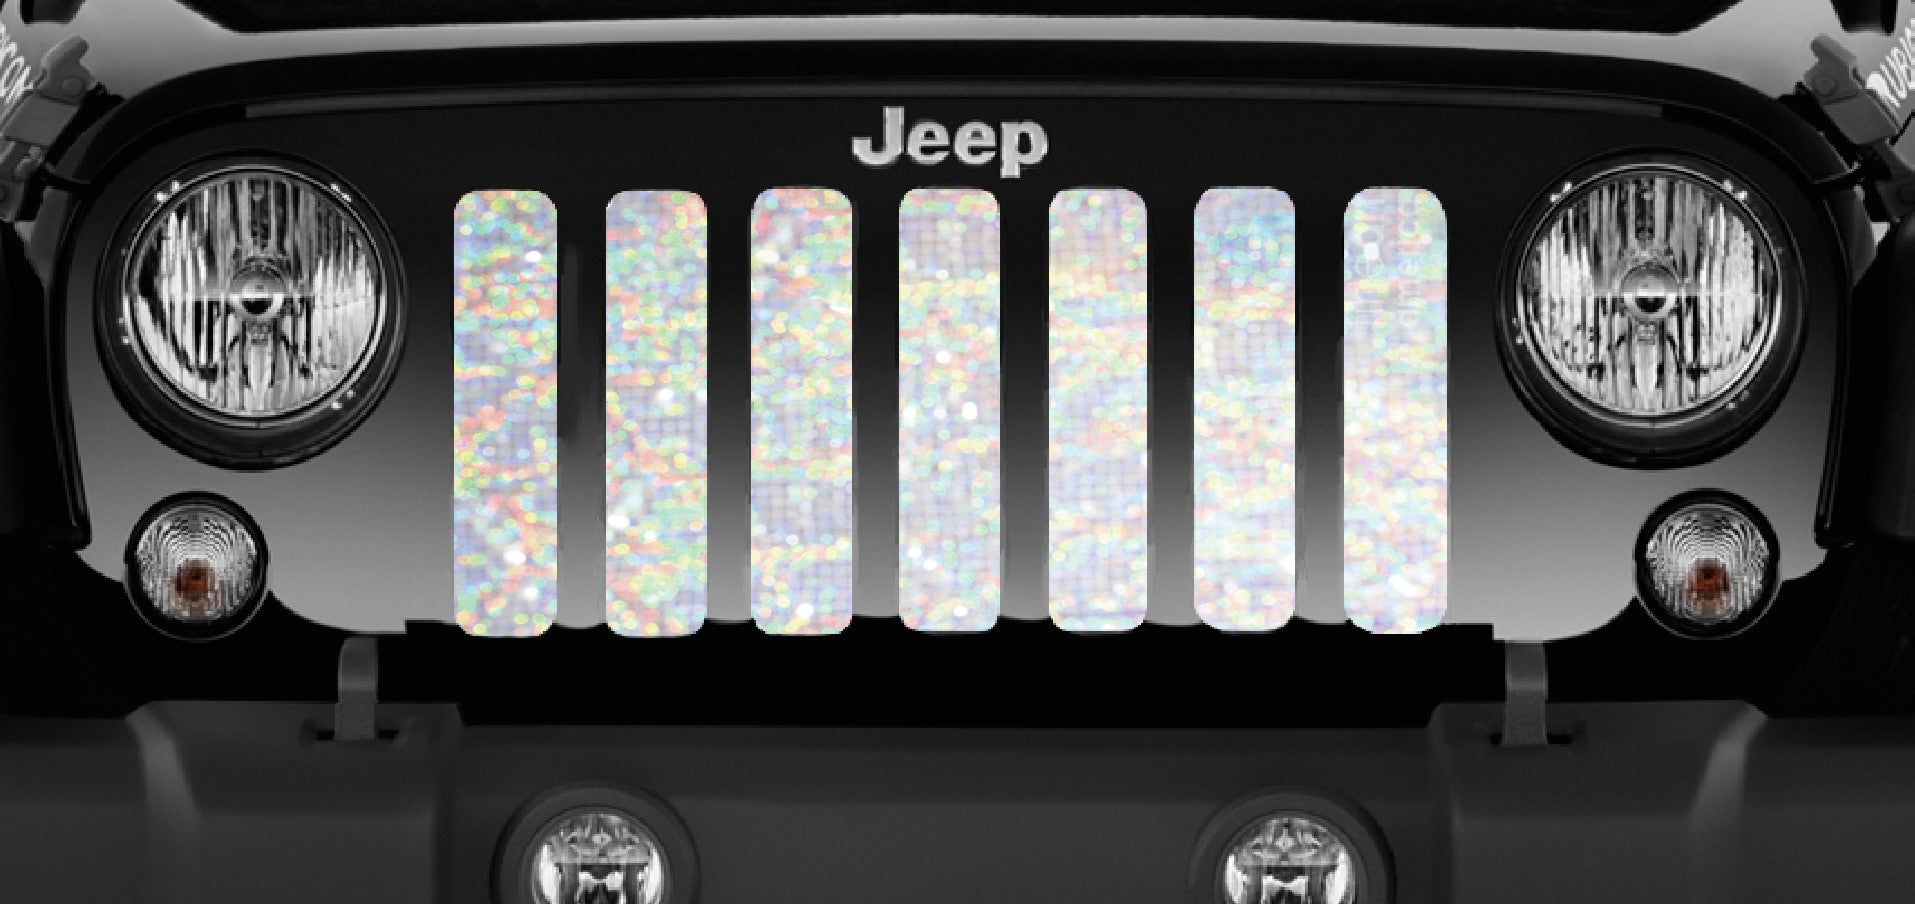 Jeep Wrangler Iridescent Print Grille Insert | Dirty Acres